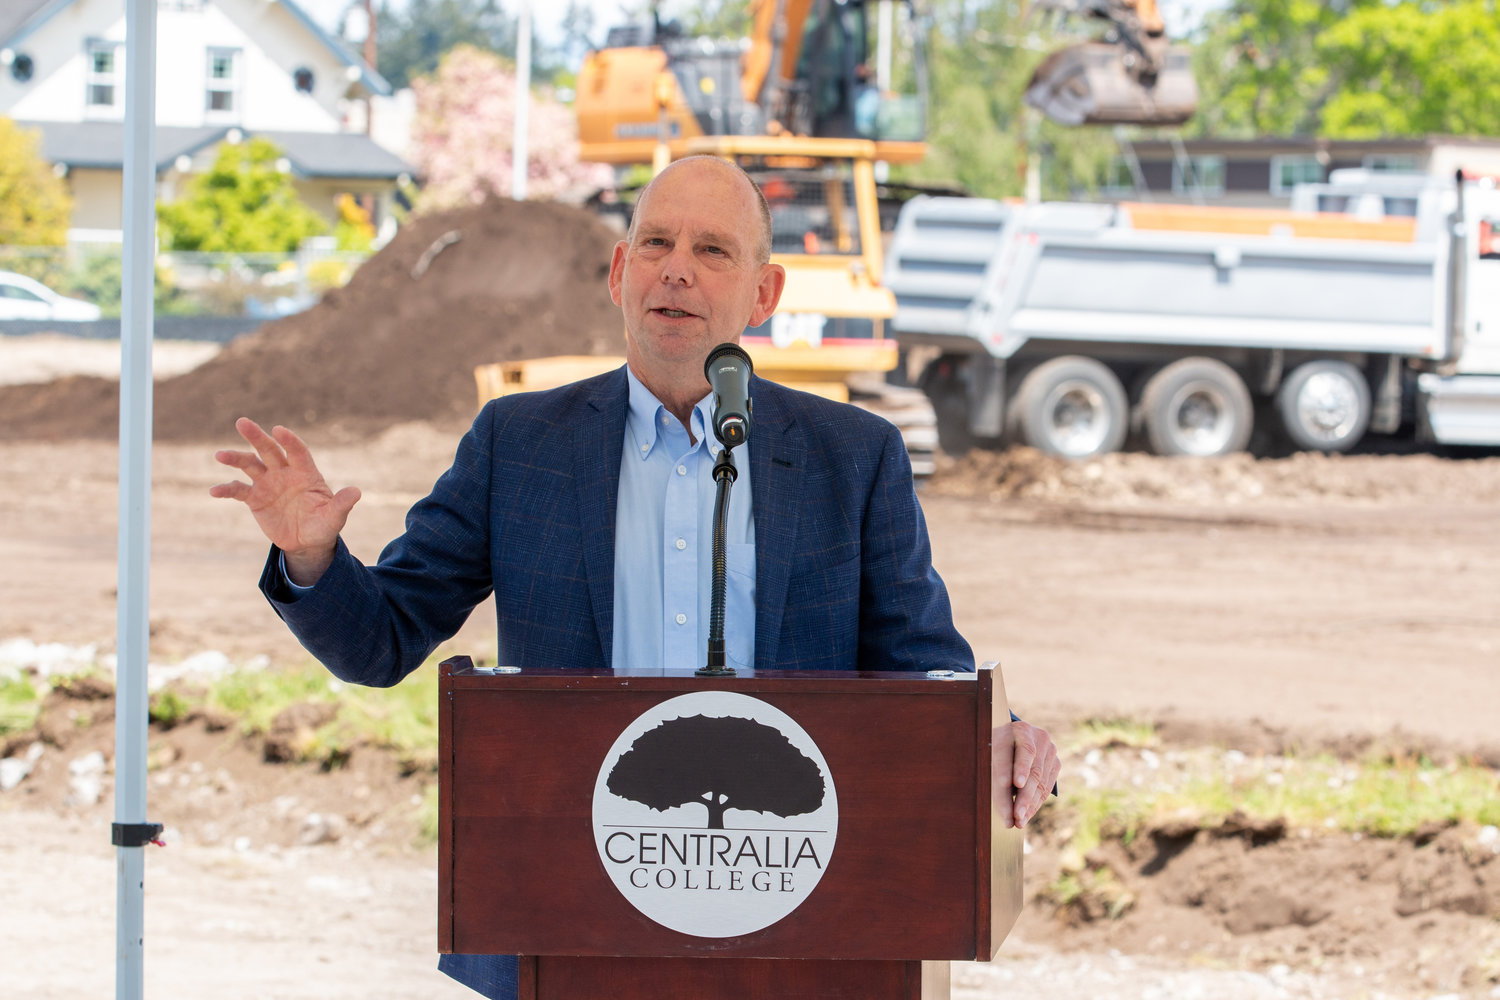 Mark Scheibmeir, Centralia College Board of Trustees member since 2017, gives a brief history of the Centralia College campus and the path that led to the creation of the muti-purpose athletic field today during the groundbreaking ceremony held Wednesday afternoon.